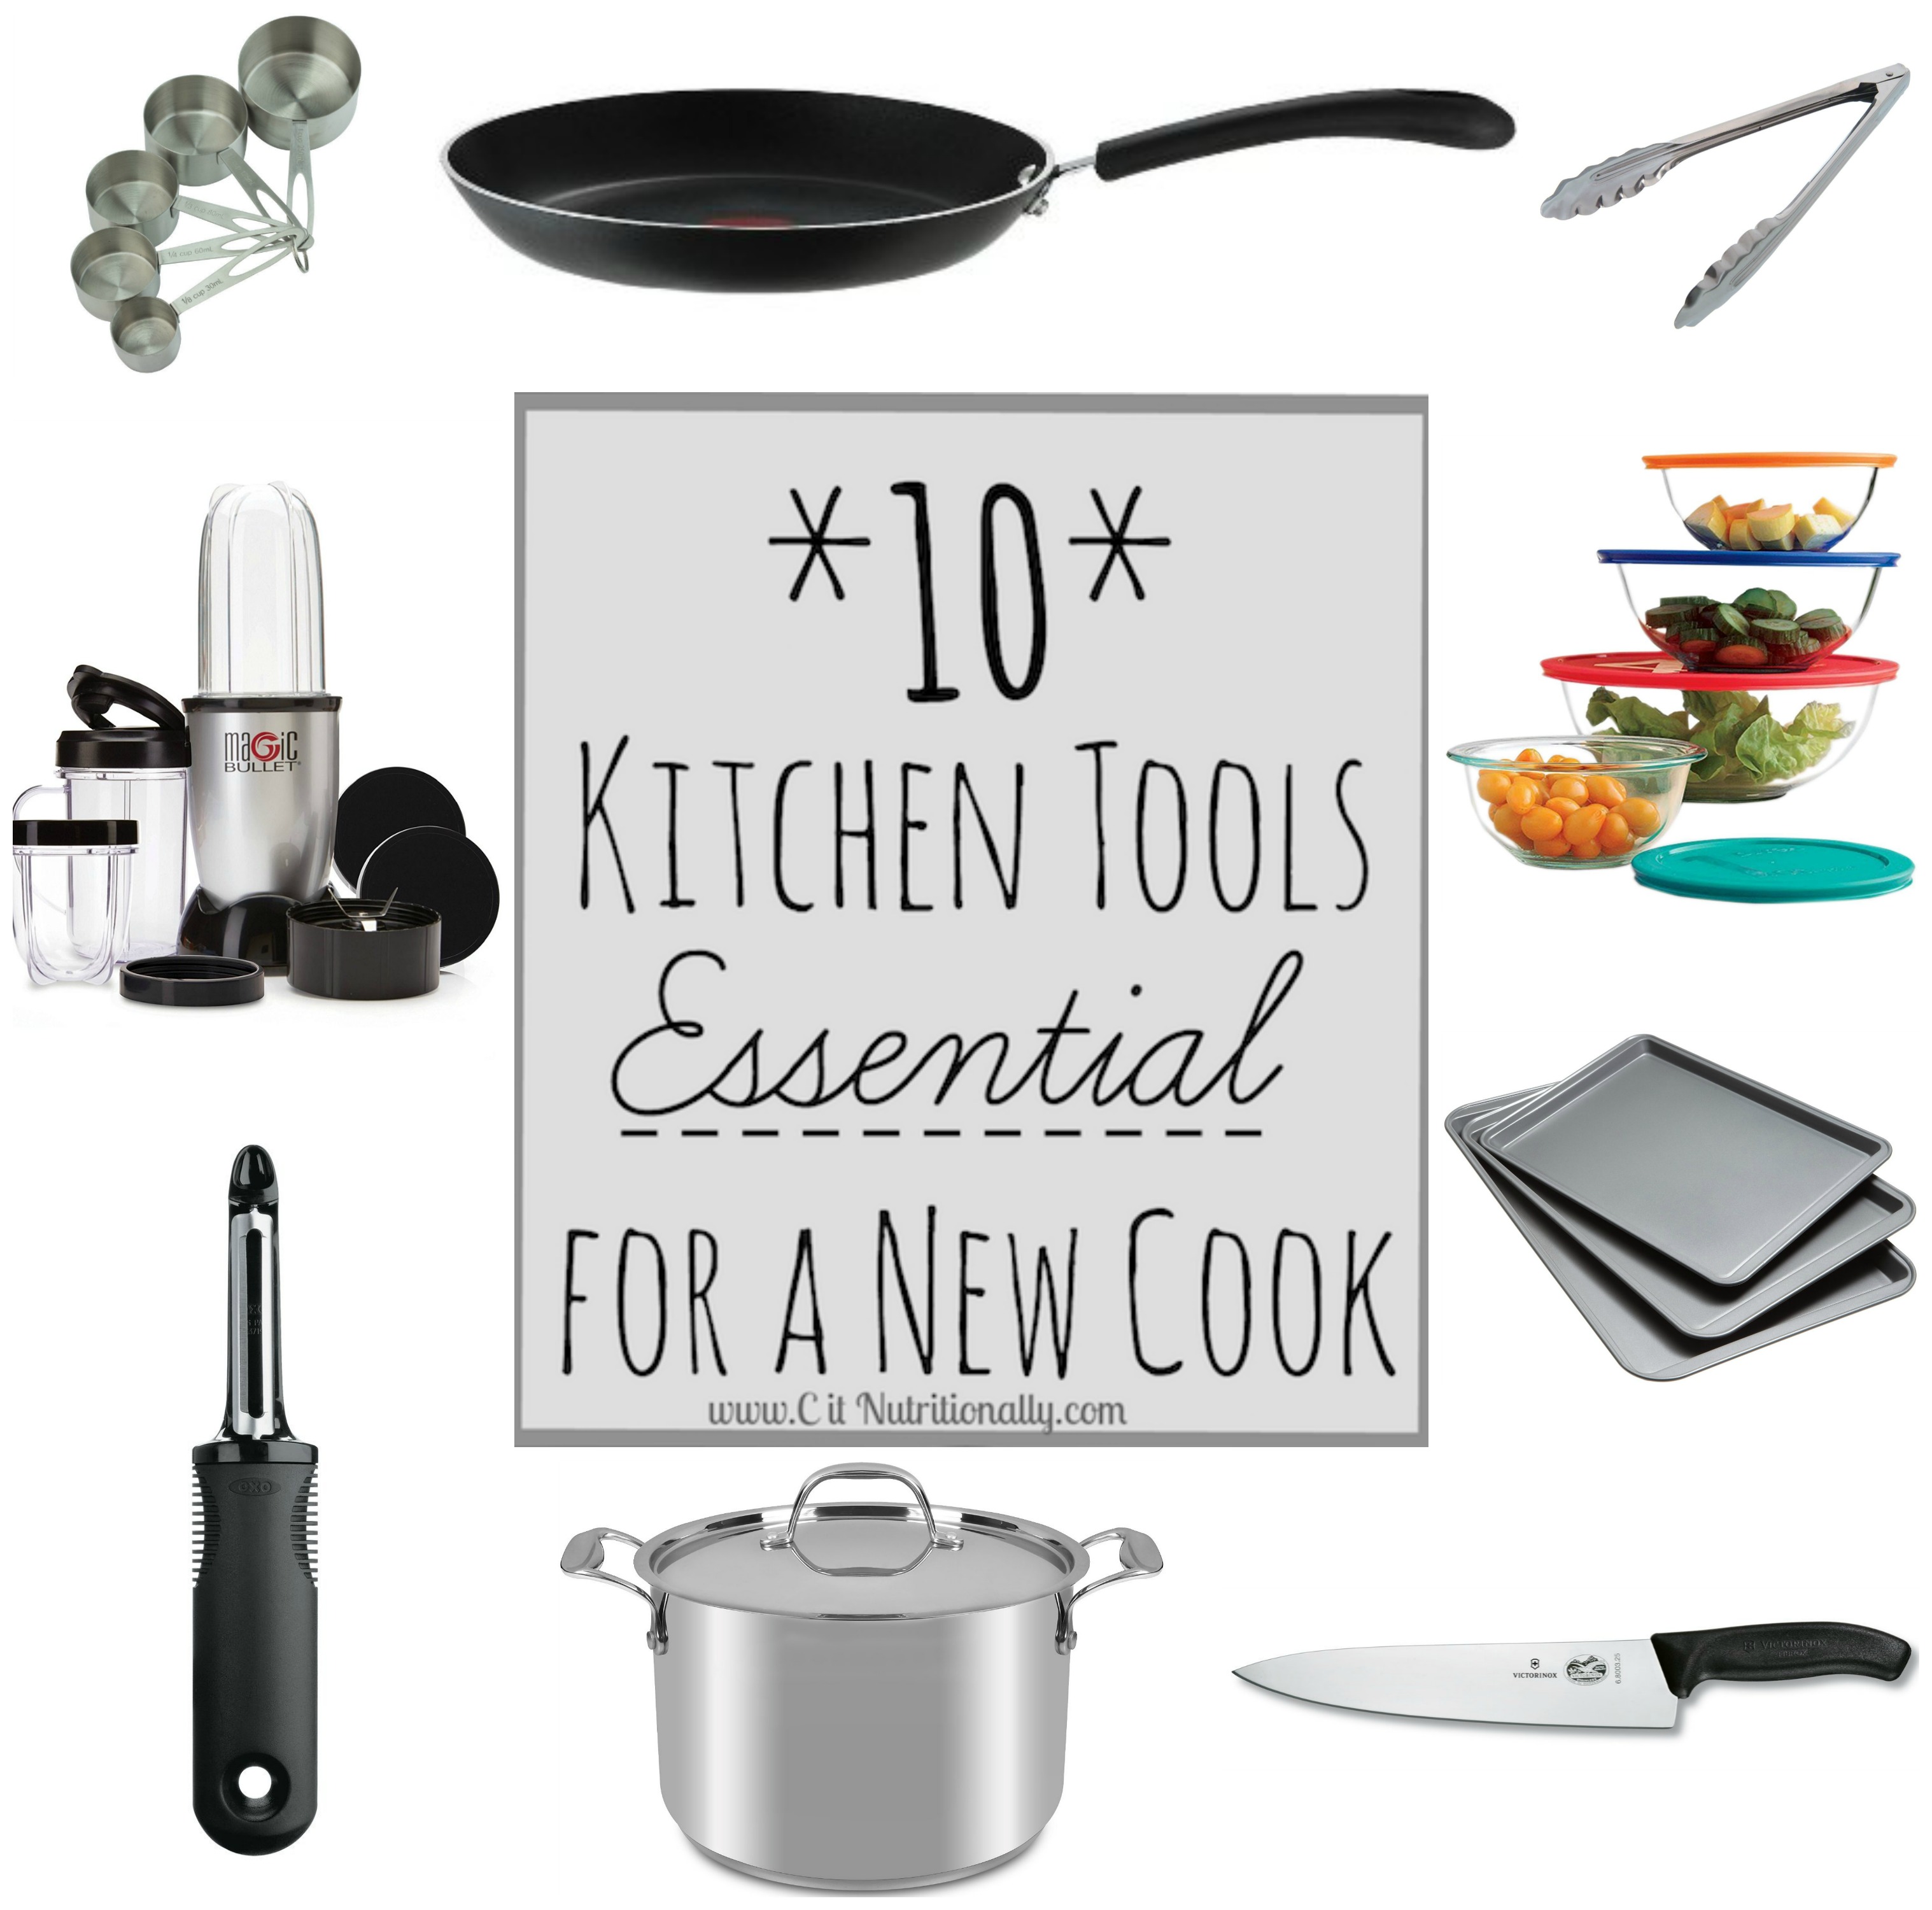 List of 10 Essential Kitchen Tools - Cooking with Team J